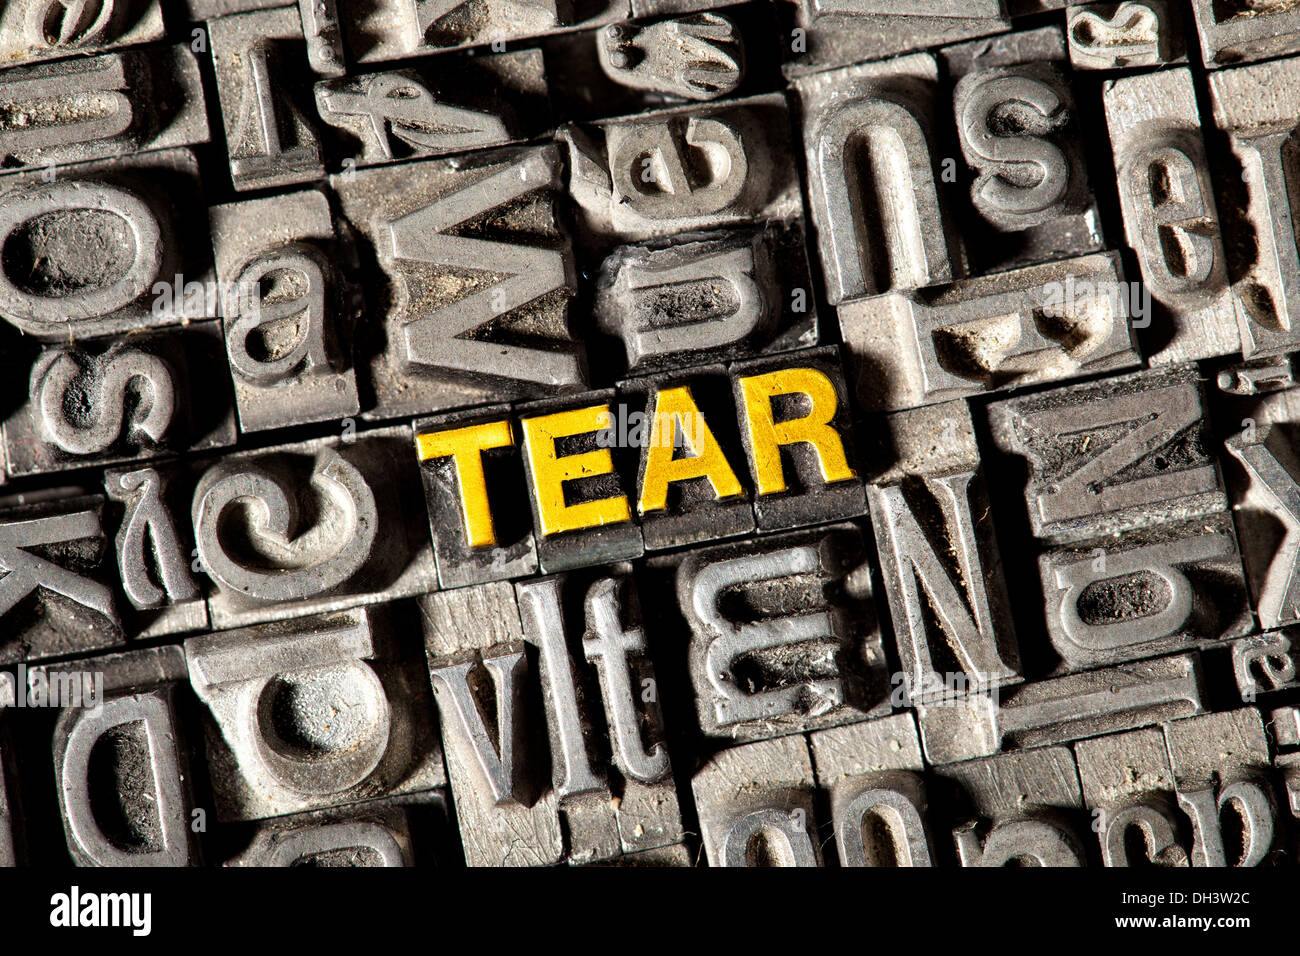 Old lead letters forming the word 'TEAR' Stock Photo